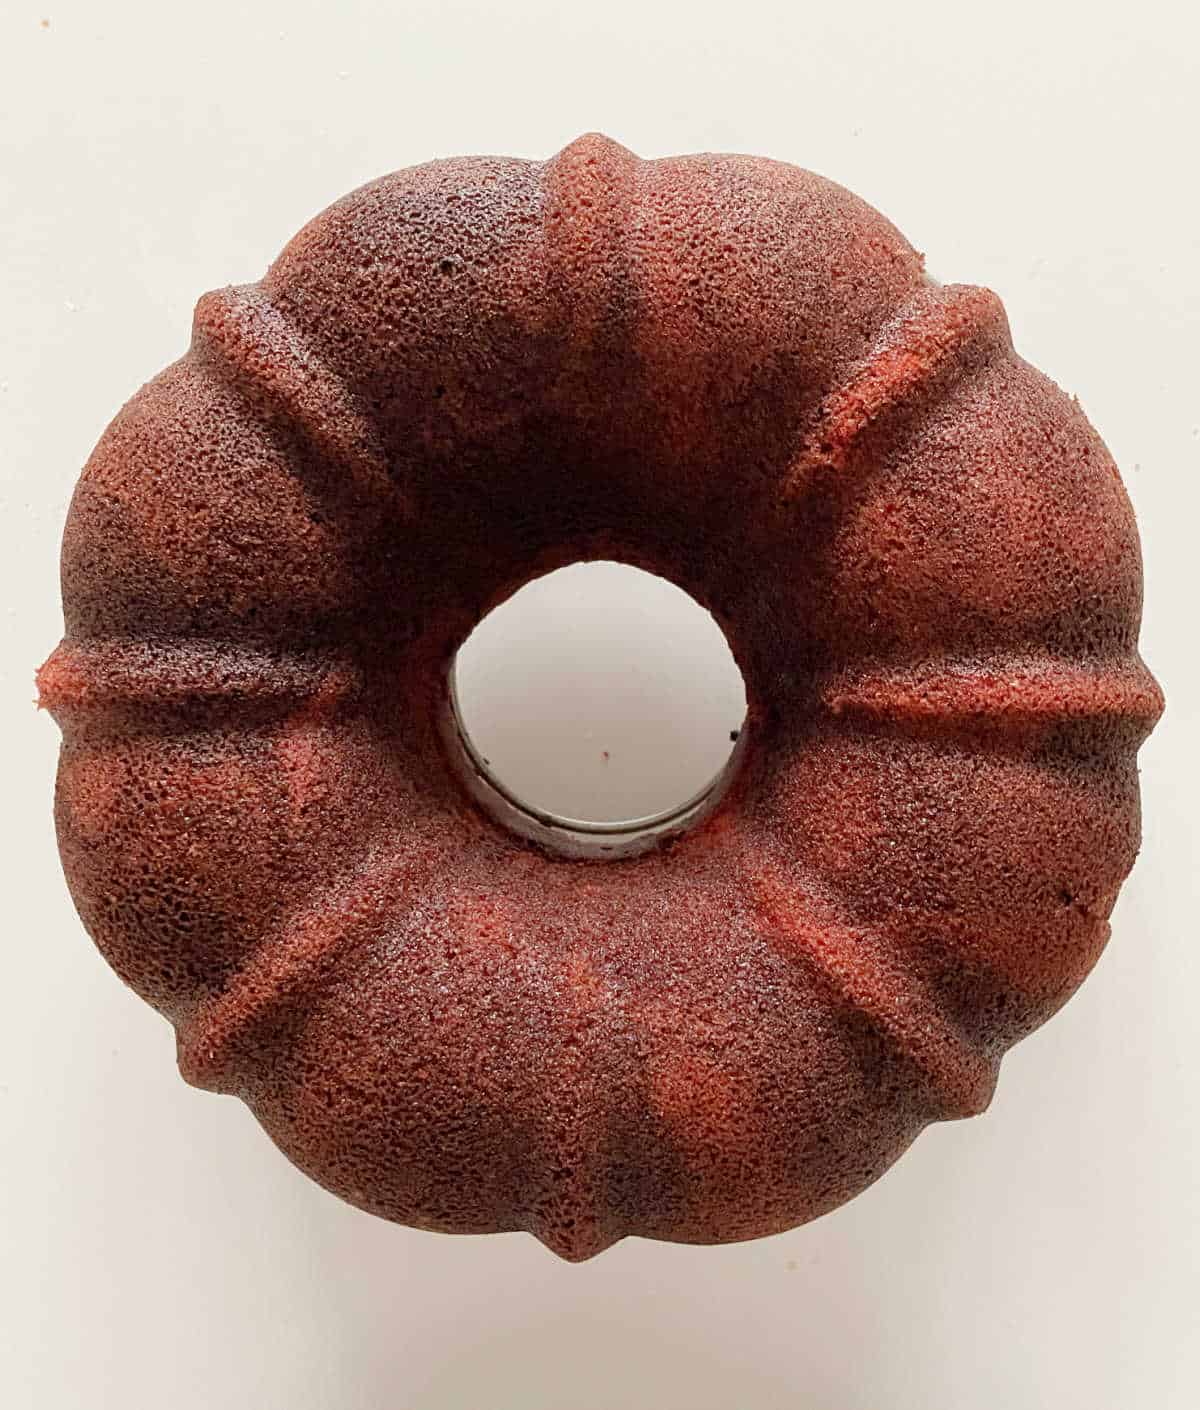 Whole red velvet bundt cake before frosting. View from above. White surface.